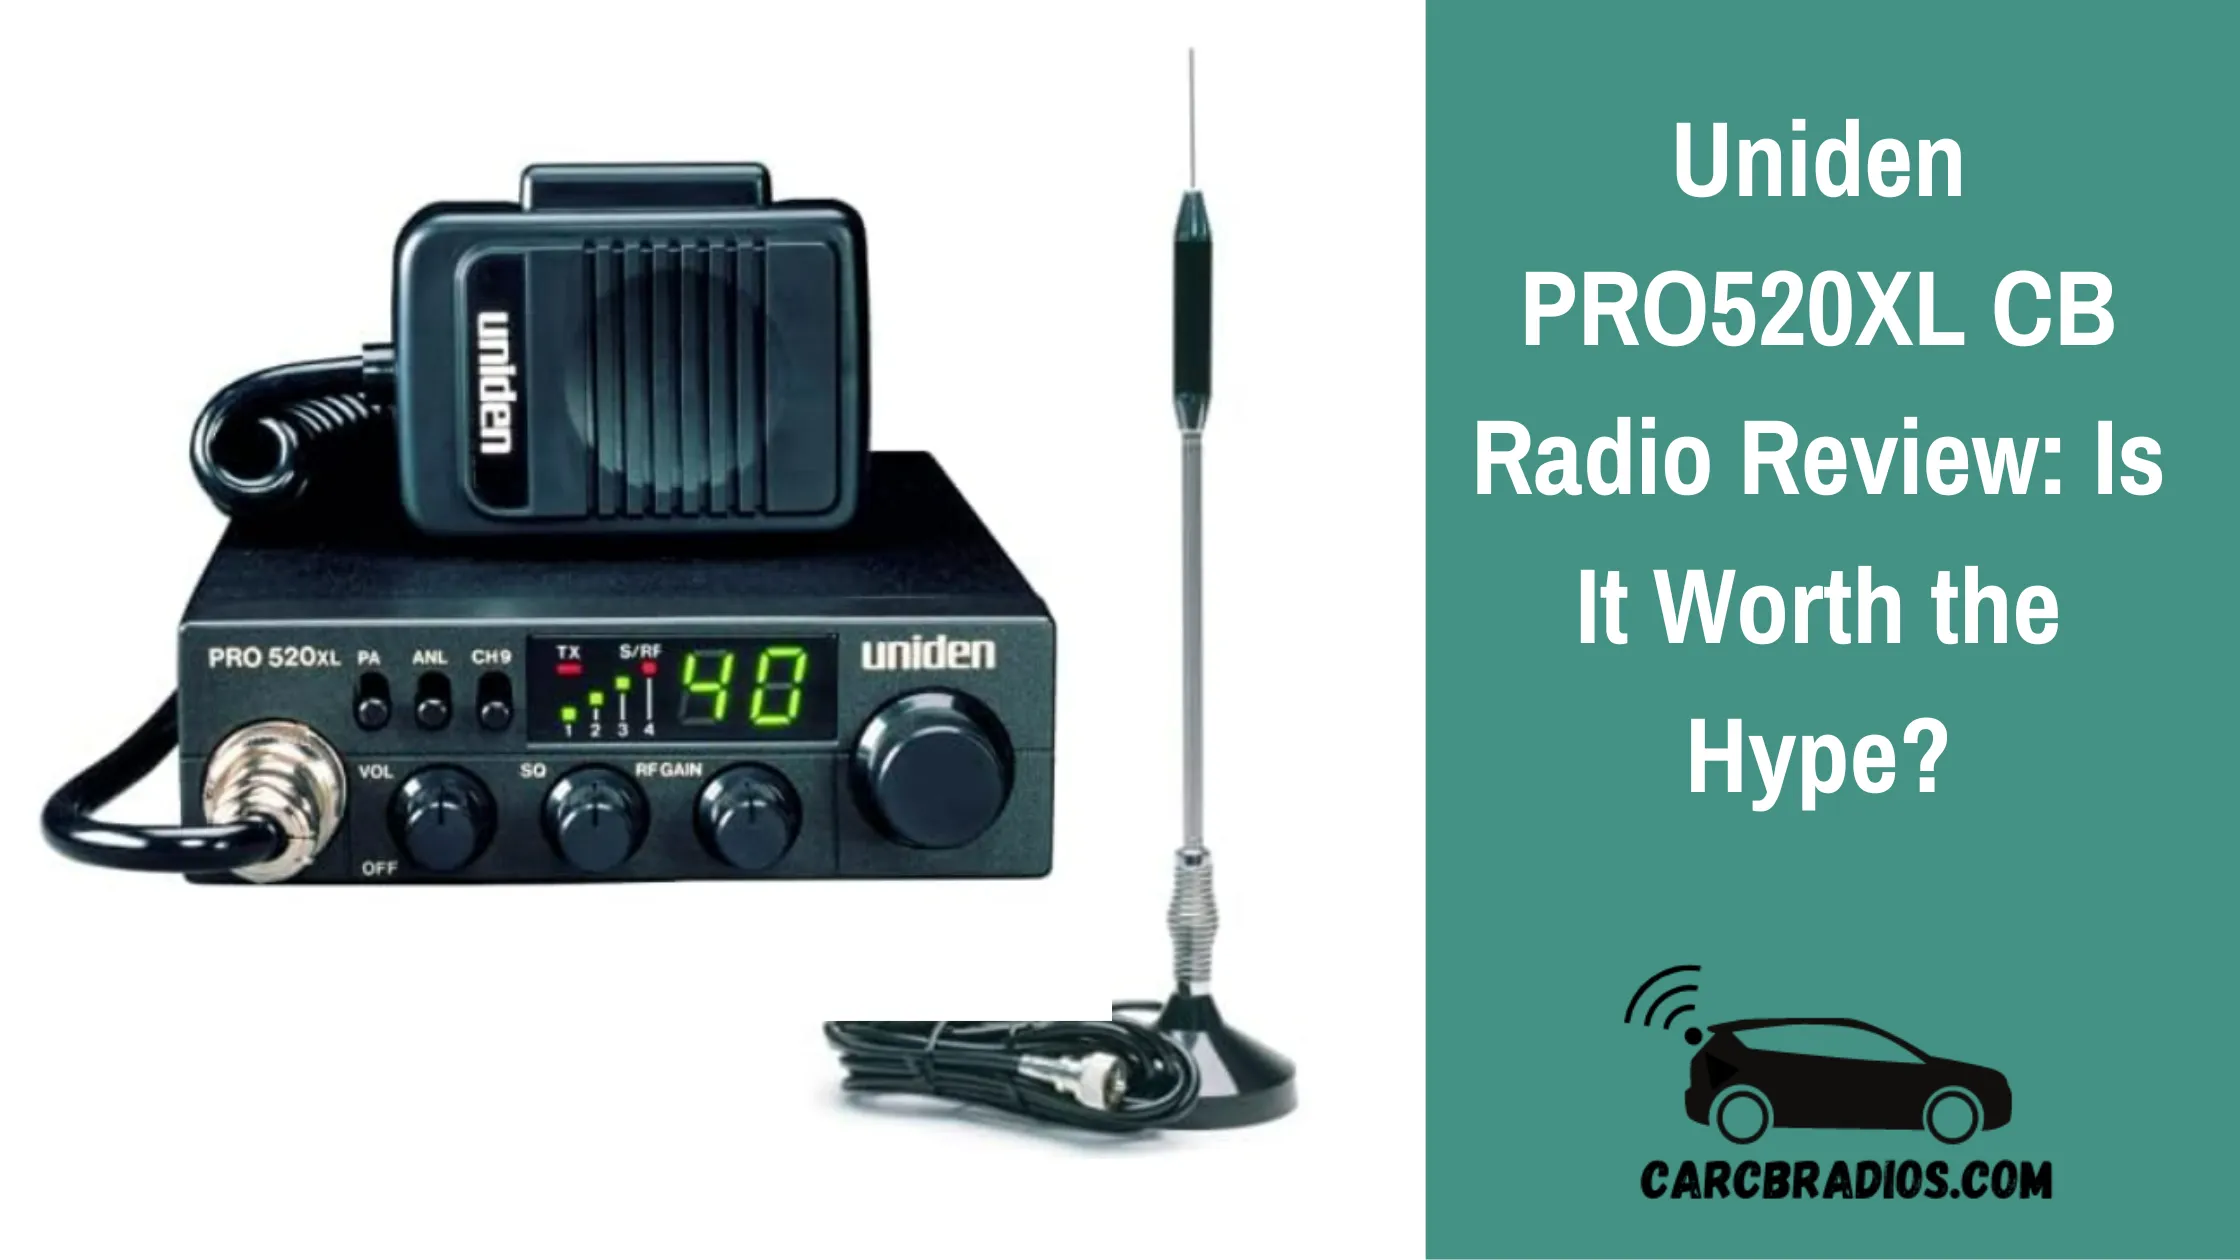 If you're in the market for a reliable and compact CB radio, the Uniden PRO520XL Pro Series 40-Channel CB Radio is a great choice. With its 40 channels, precise frequency control, and built-in features, it's a must-have for anyone who spends a lot of time on the road. Click here to purchase the Uniden PRO520XL Pro Series 40-Channel CB Radio now and stay connected on the road.